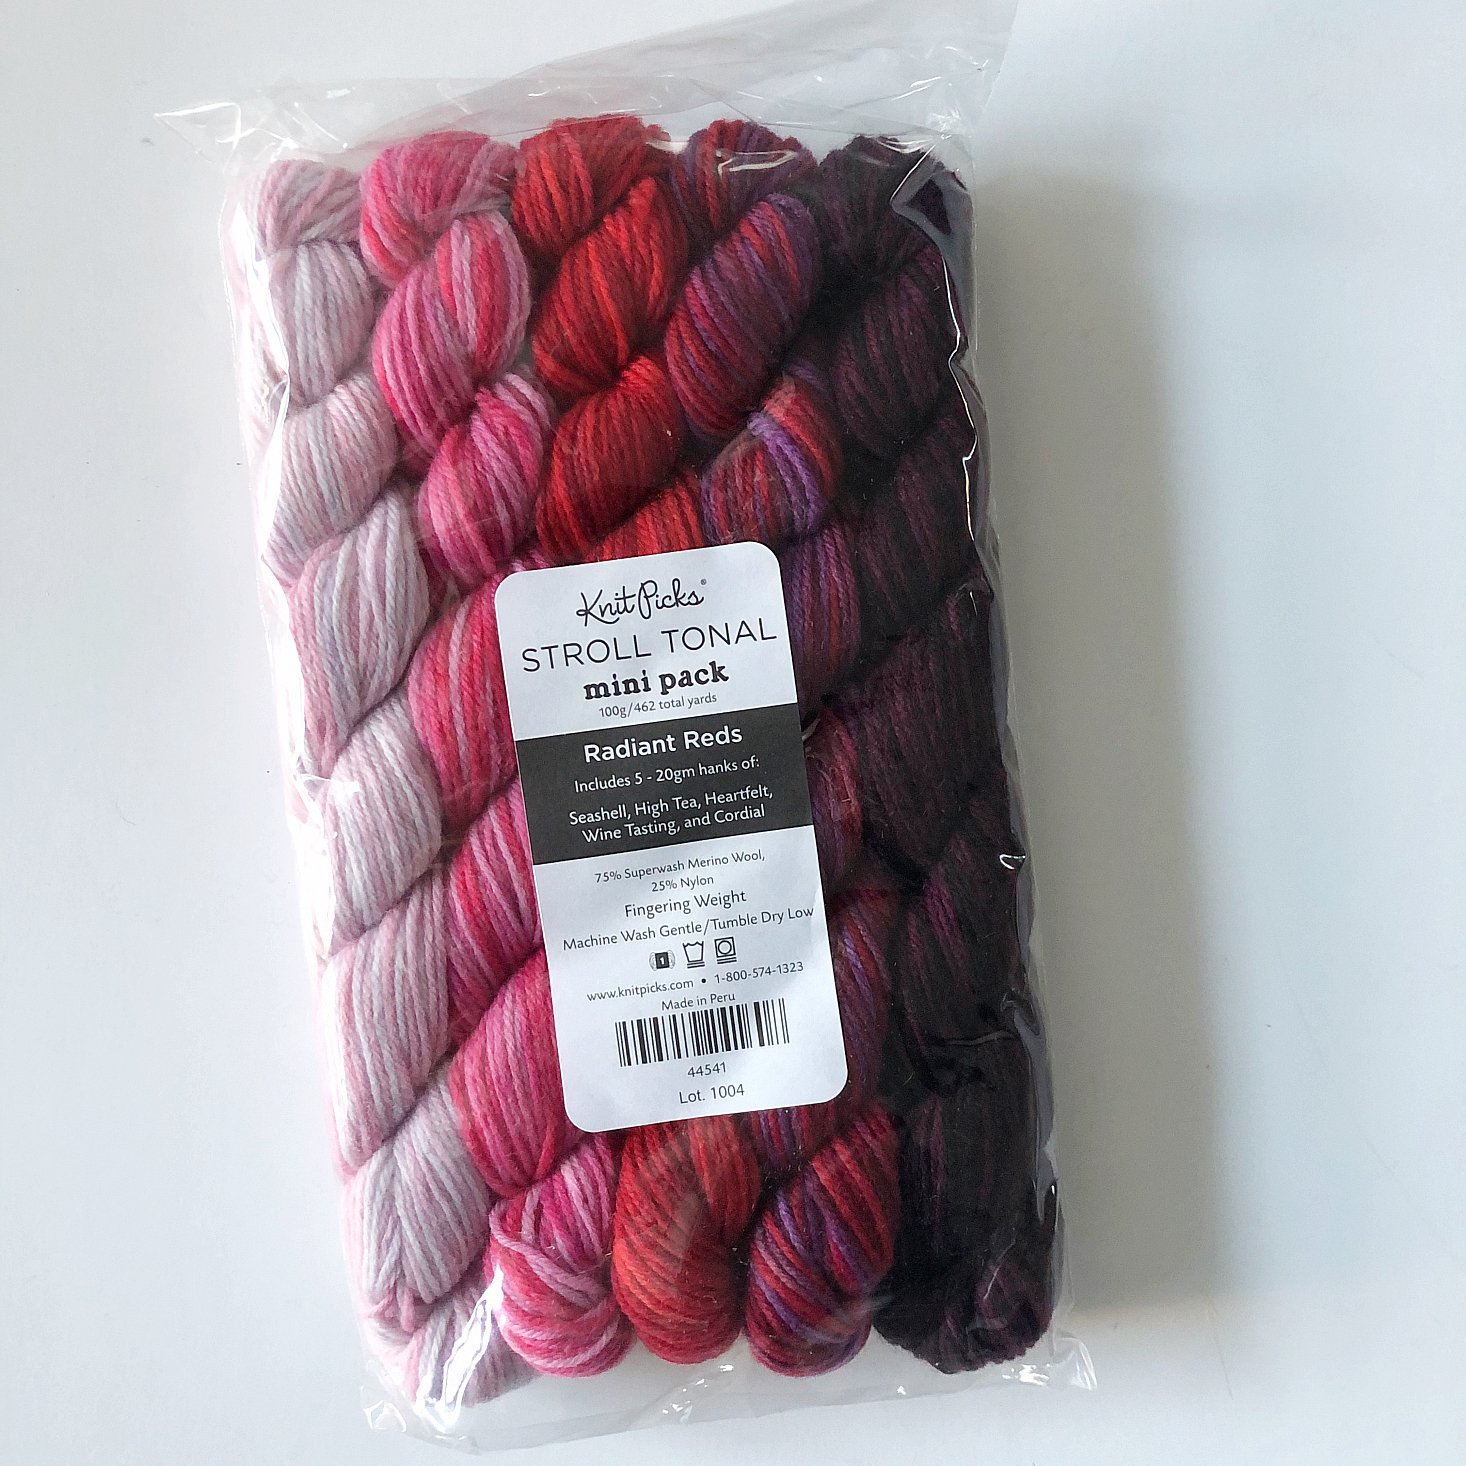 Knit Picks Review October 2019 red minis one